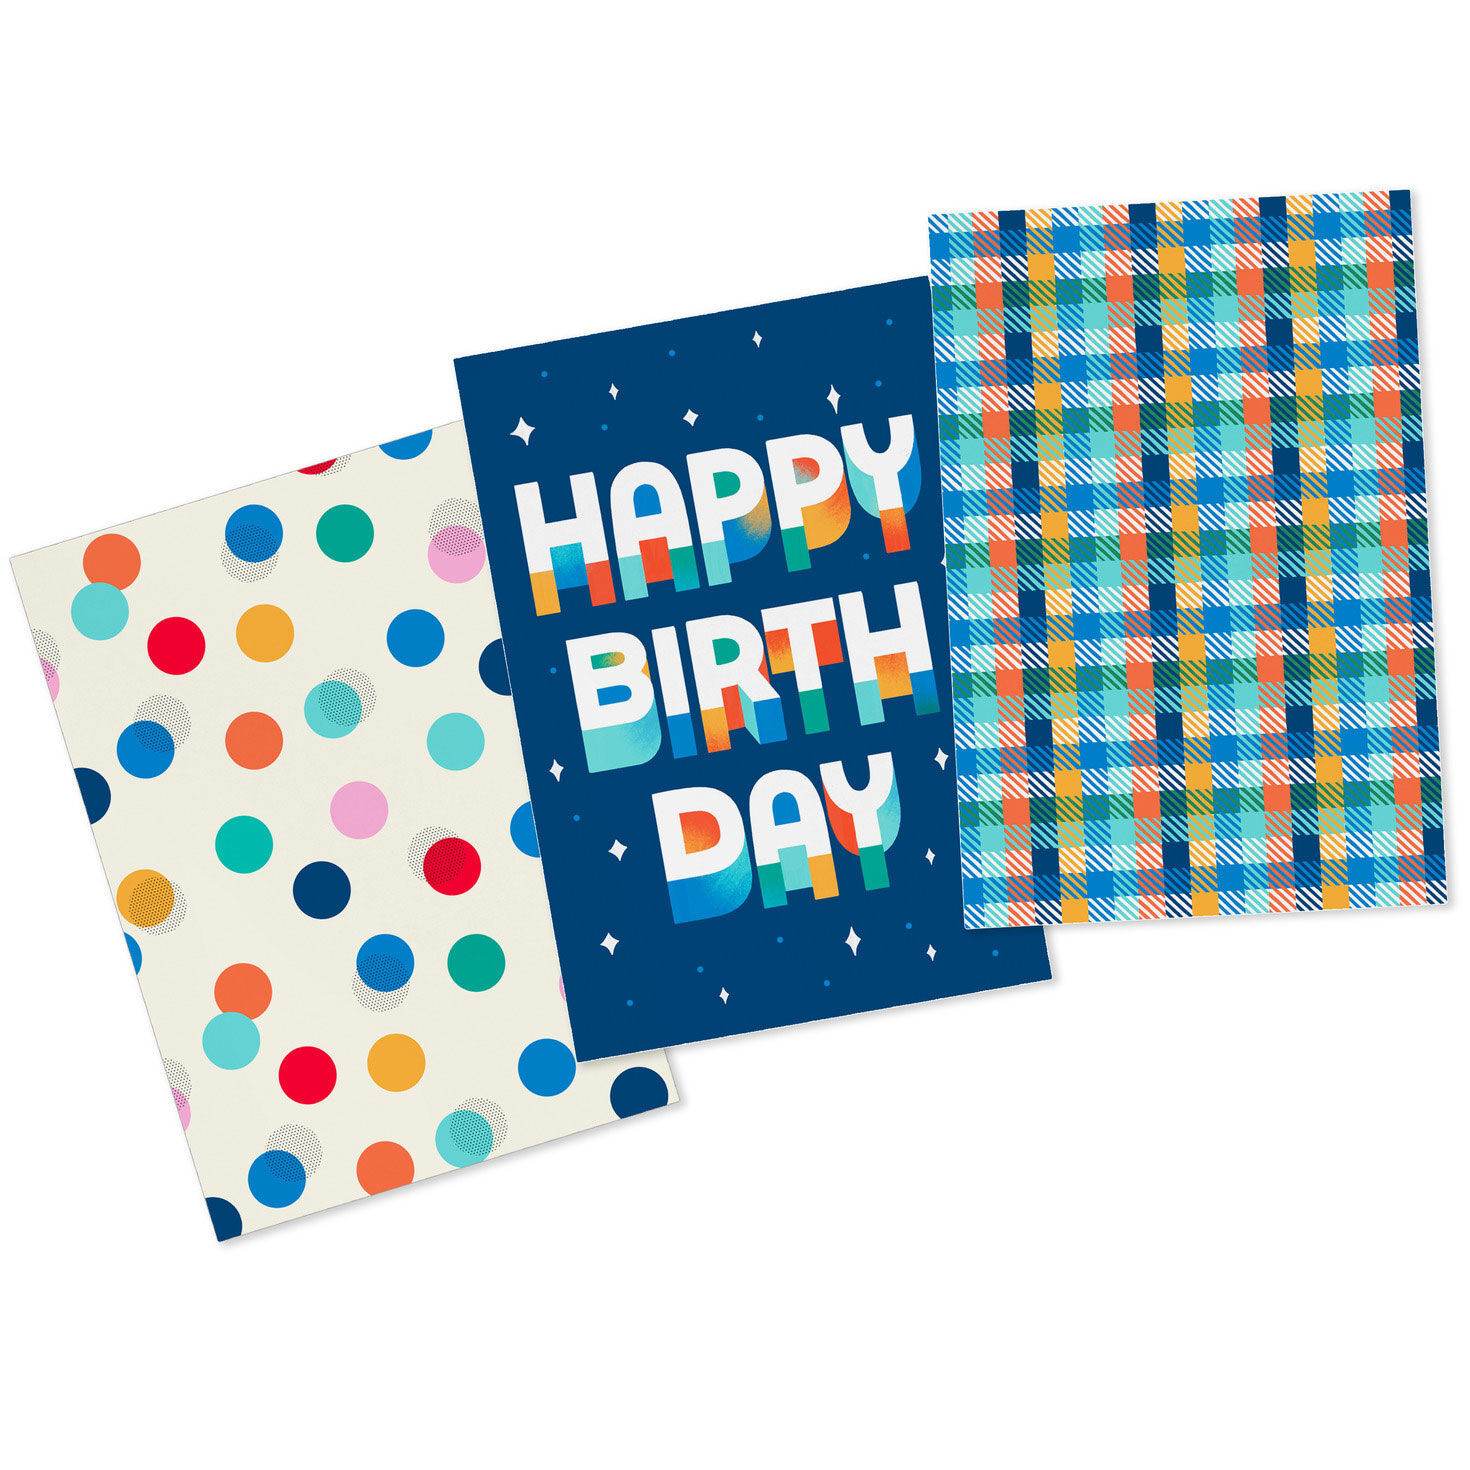 Birthday Blues 3-Pack Medium Gift Boxes for only USD 6.99 | Hallmark